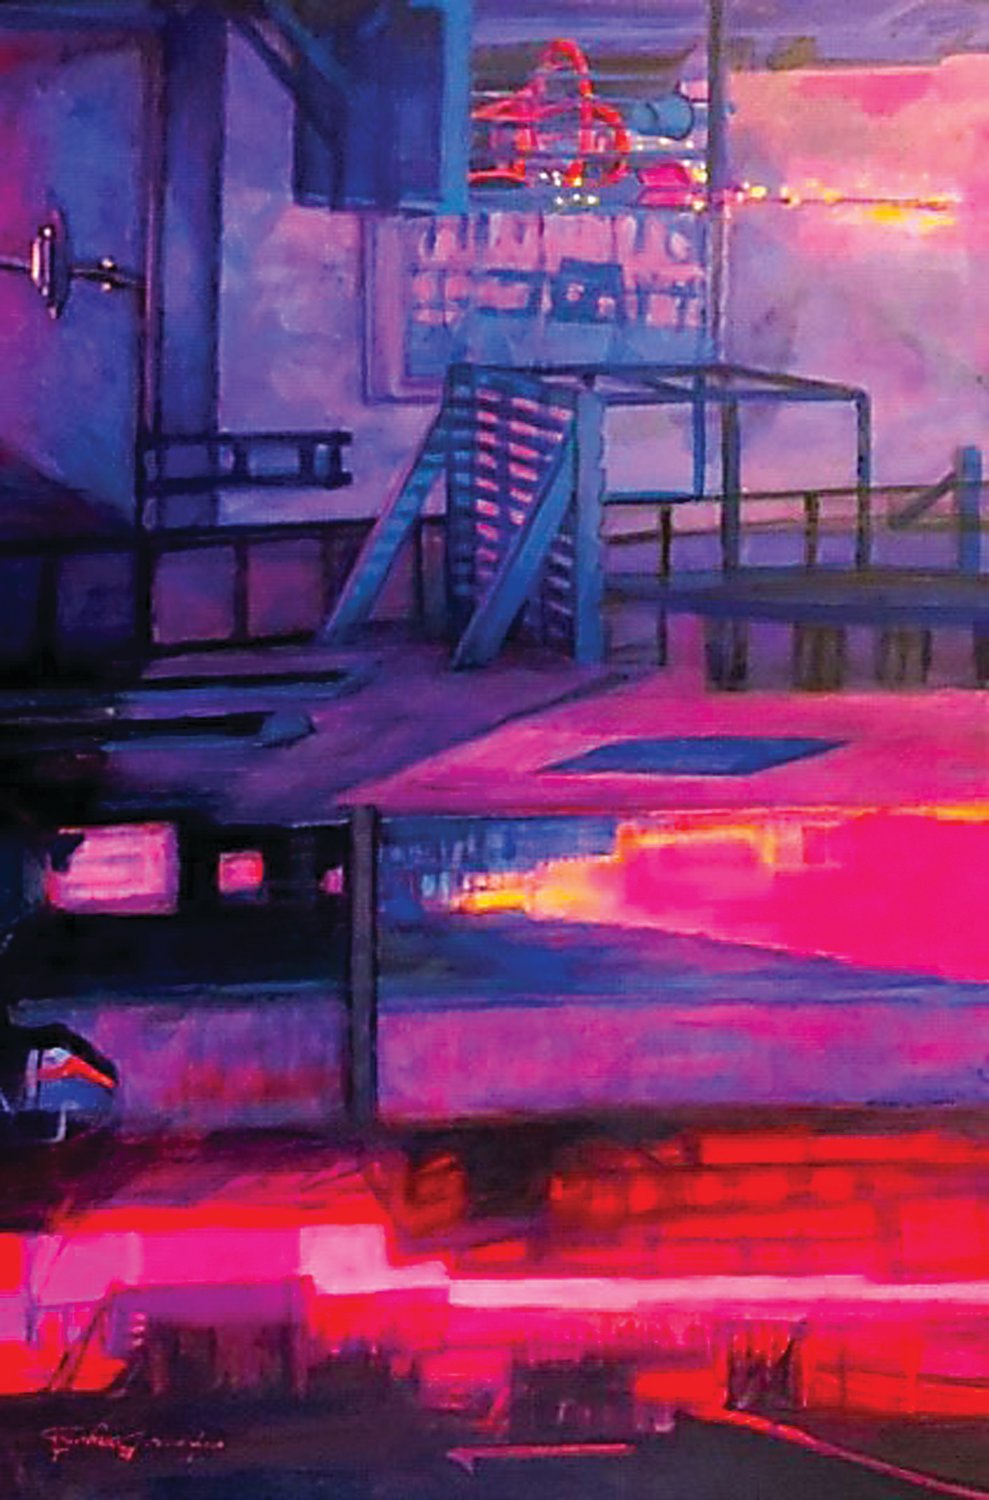 “Alley Tryp” is an acrylic on canvas by James Bongartz.